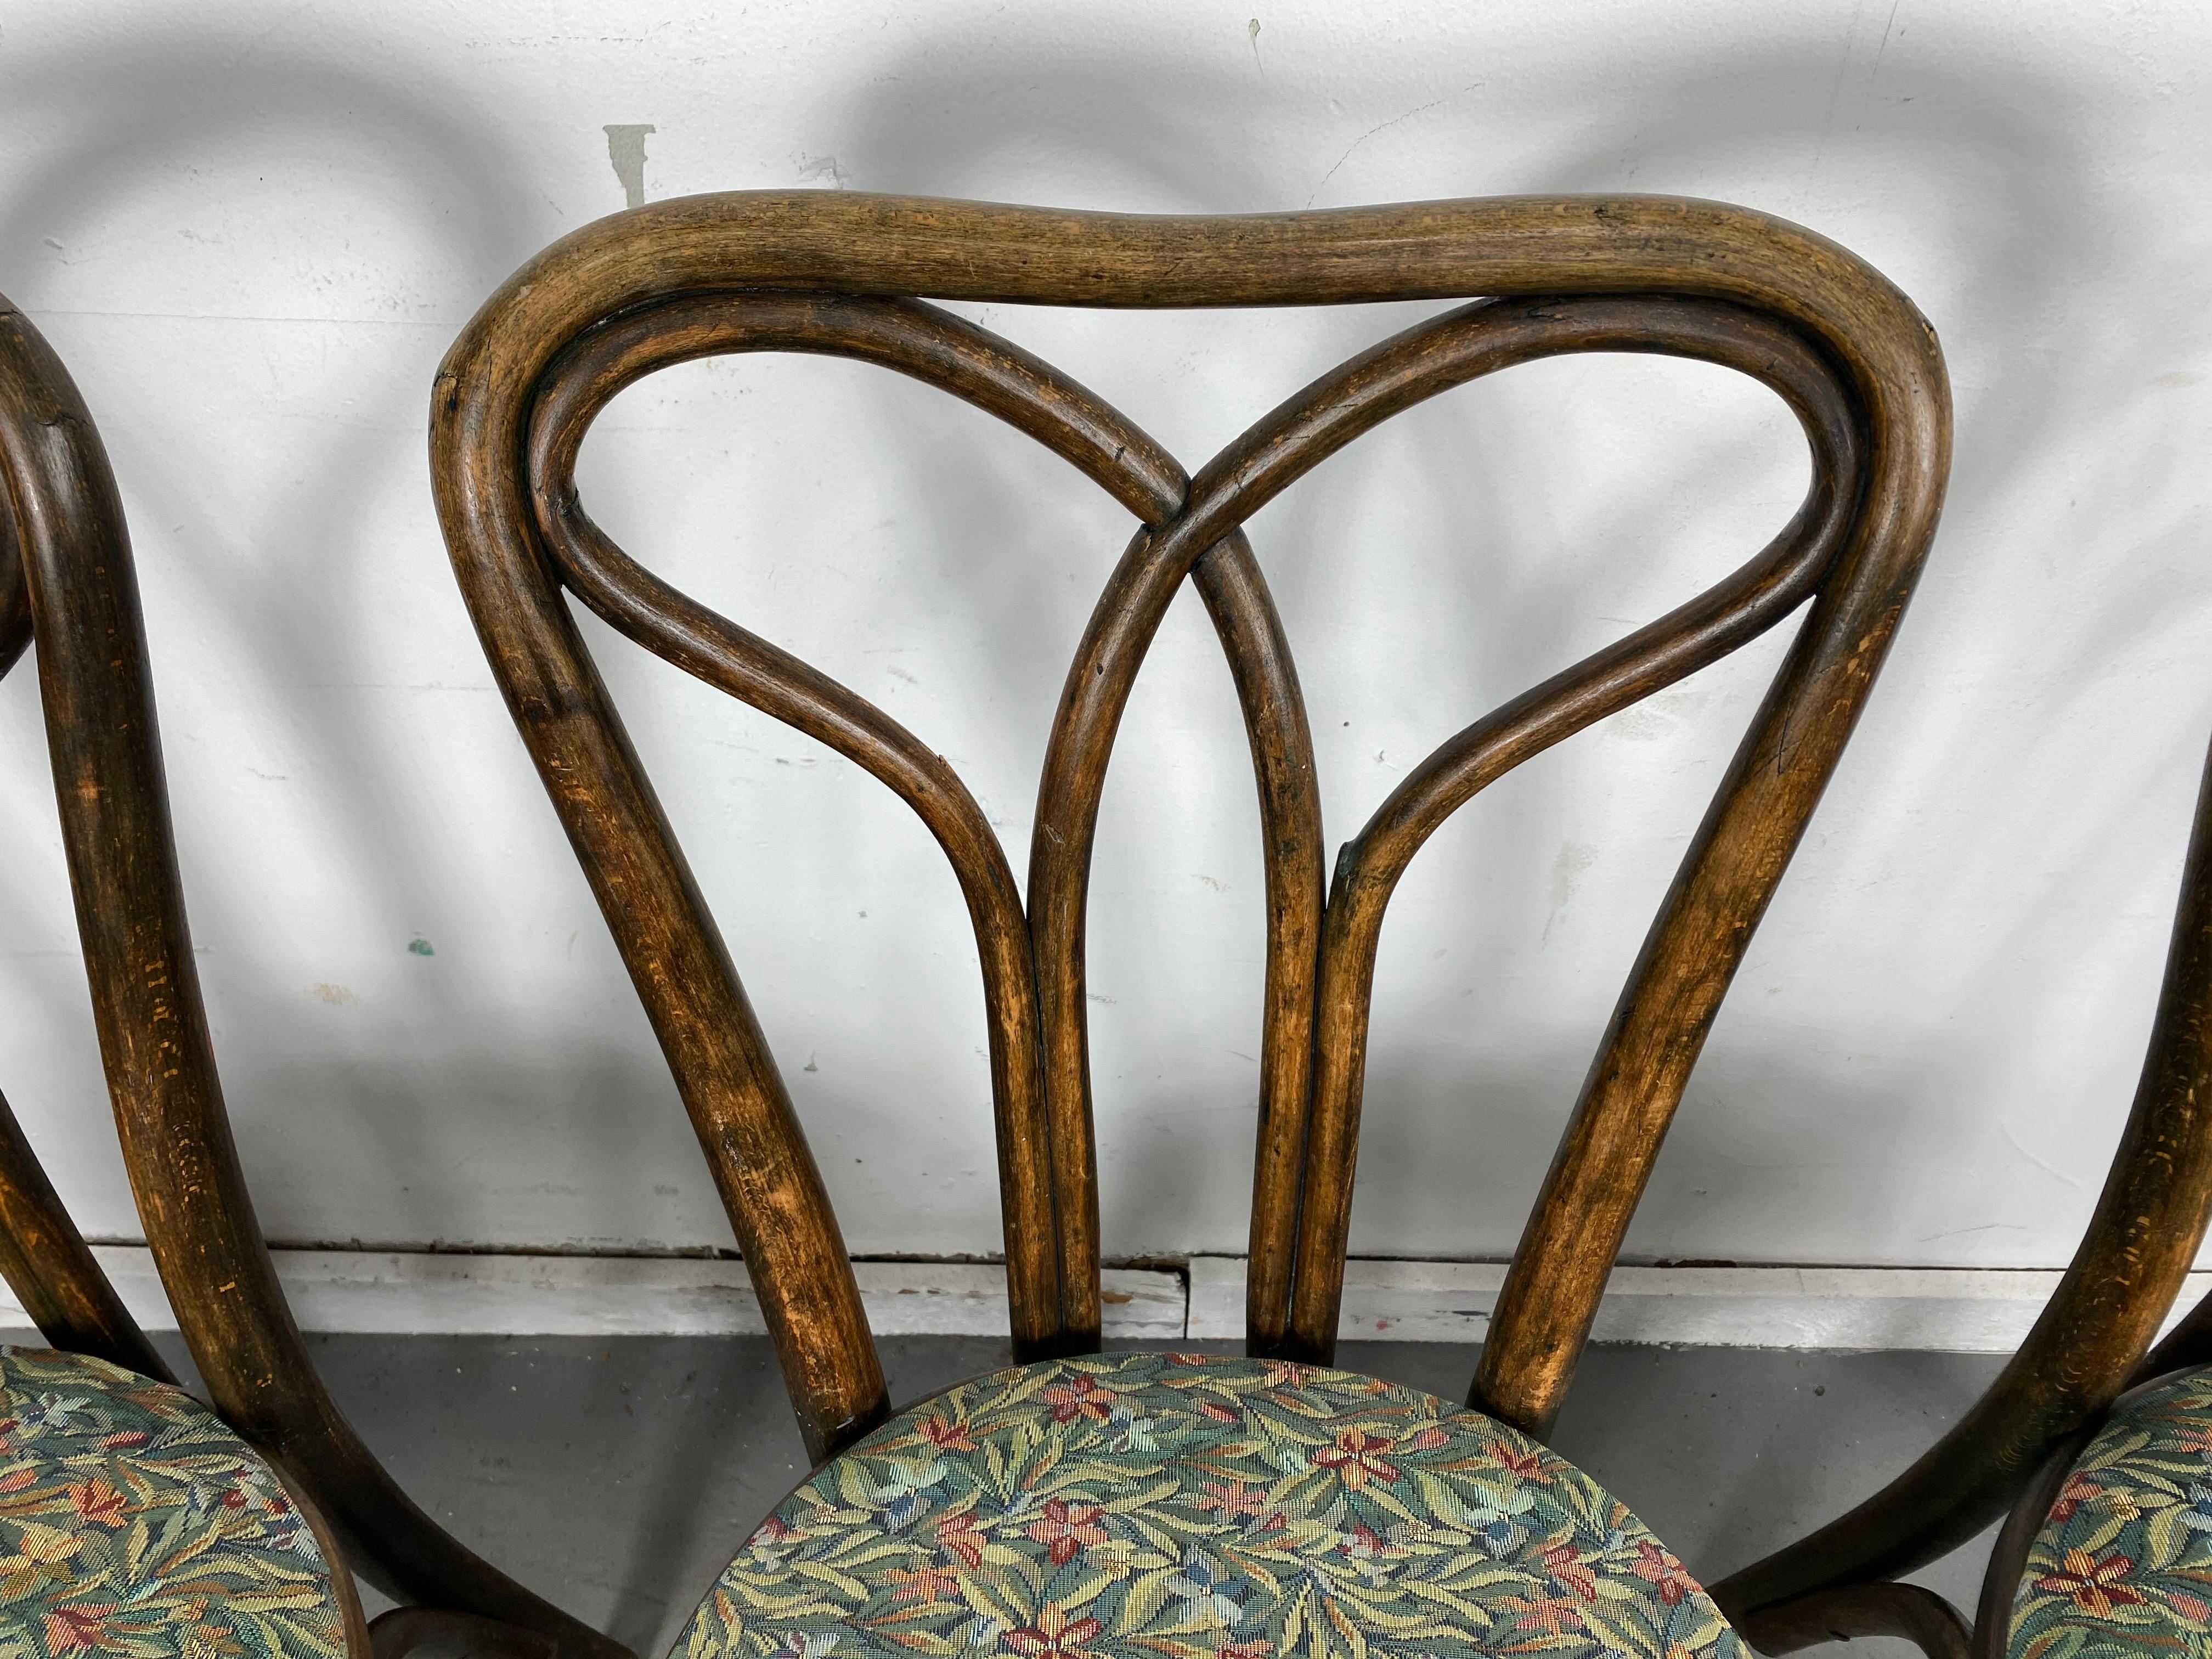 Austrian Art Nouveau Bentwood Side Chair Attributed to J & J Kohn, Early 1900's For Sale 1